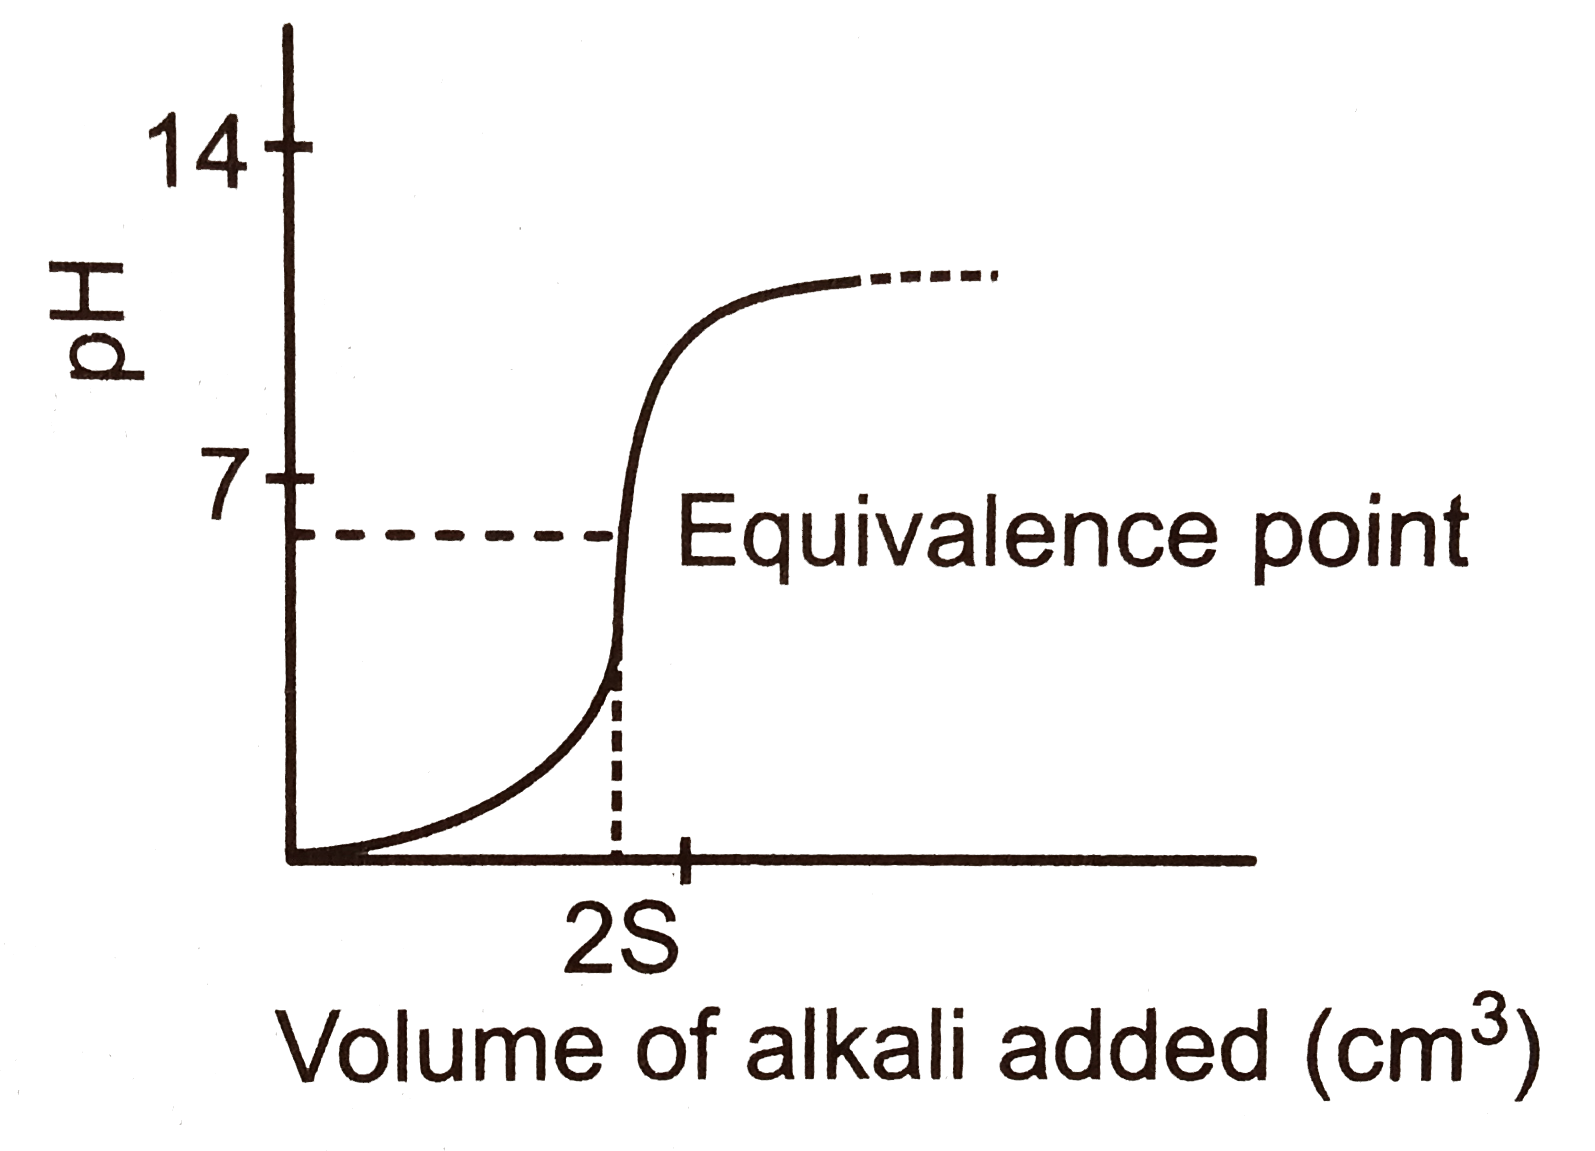 The graph represents the titration curve for :
 a.Strong acid and strong base
 b.Strong acid and weak base
 c.Weak acid and strong base
 d.Weak acid and weak base